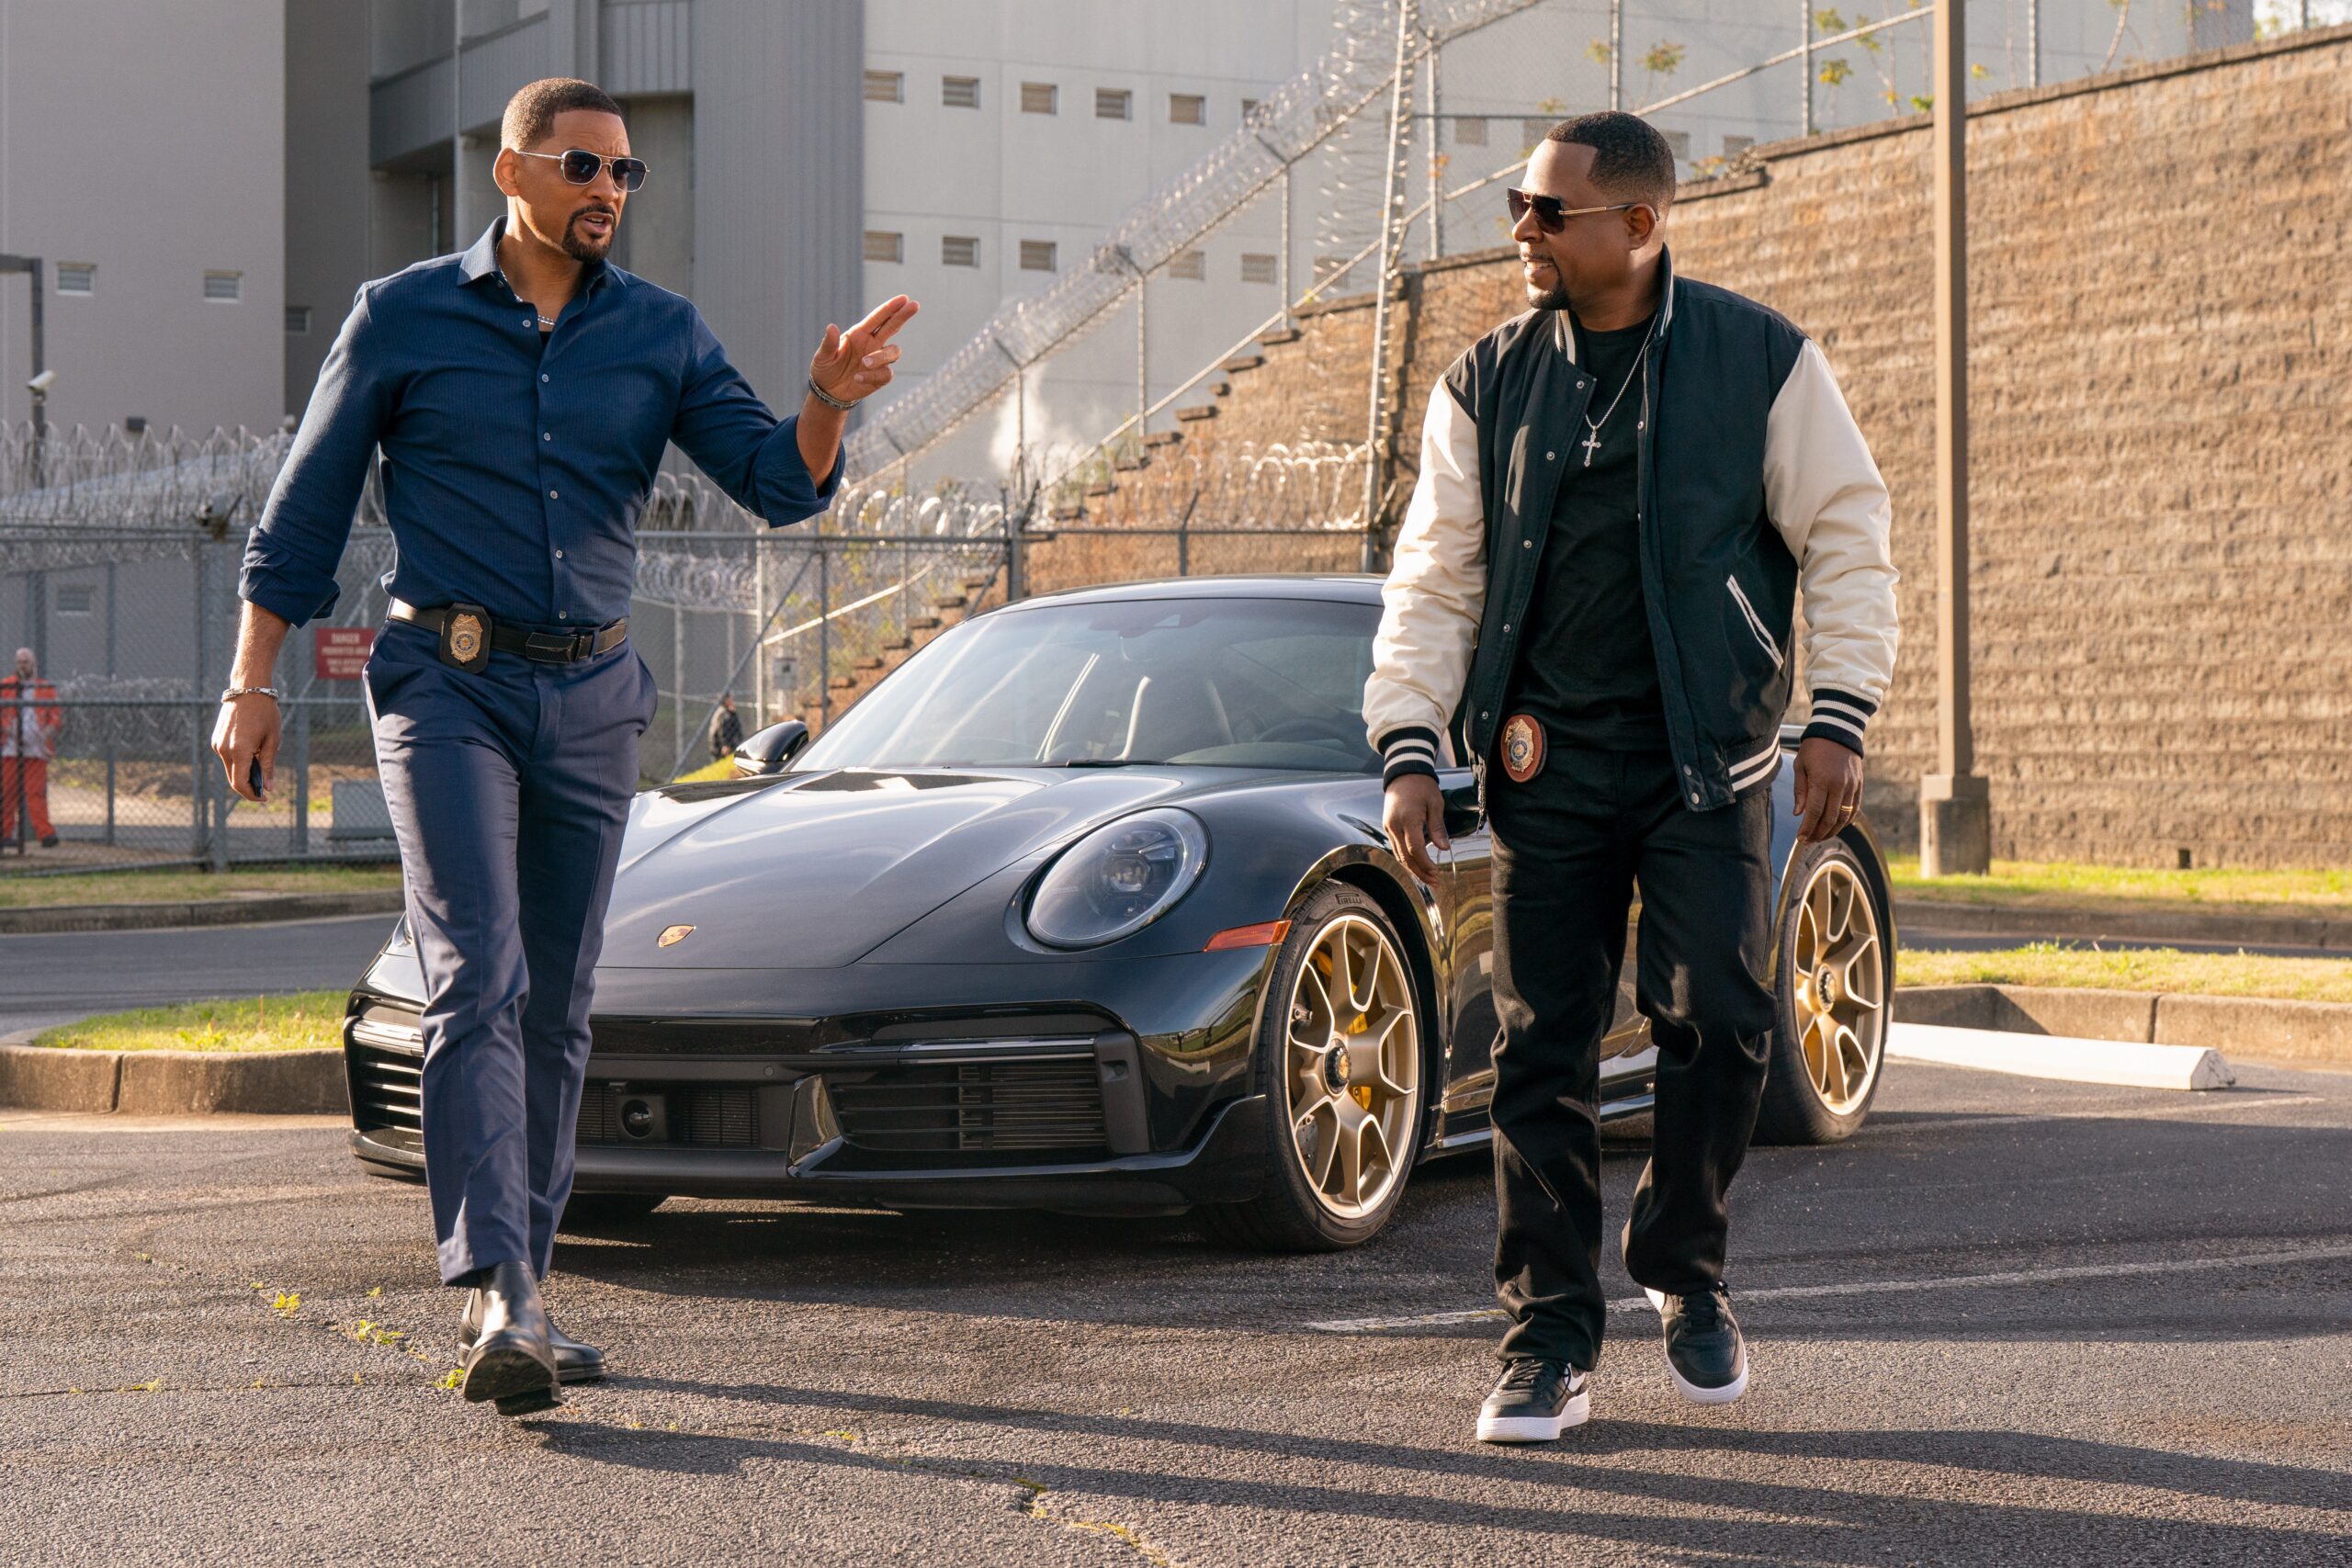 Bad Boys: Ride Or Die Trailer Has Lowrey and Burnett on the Run